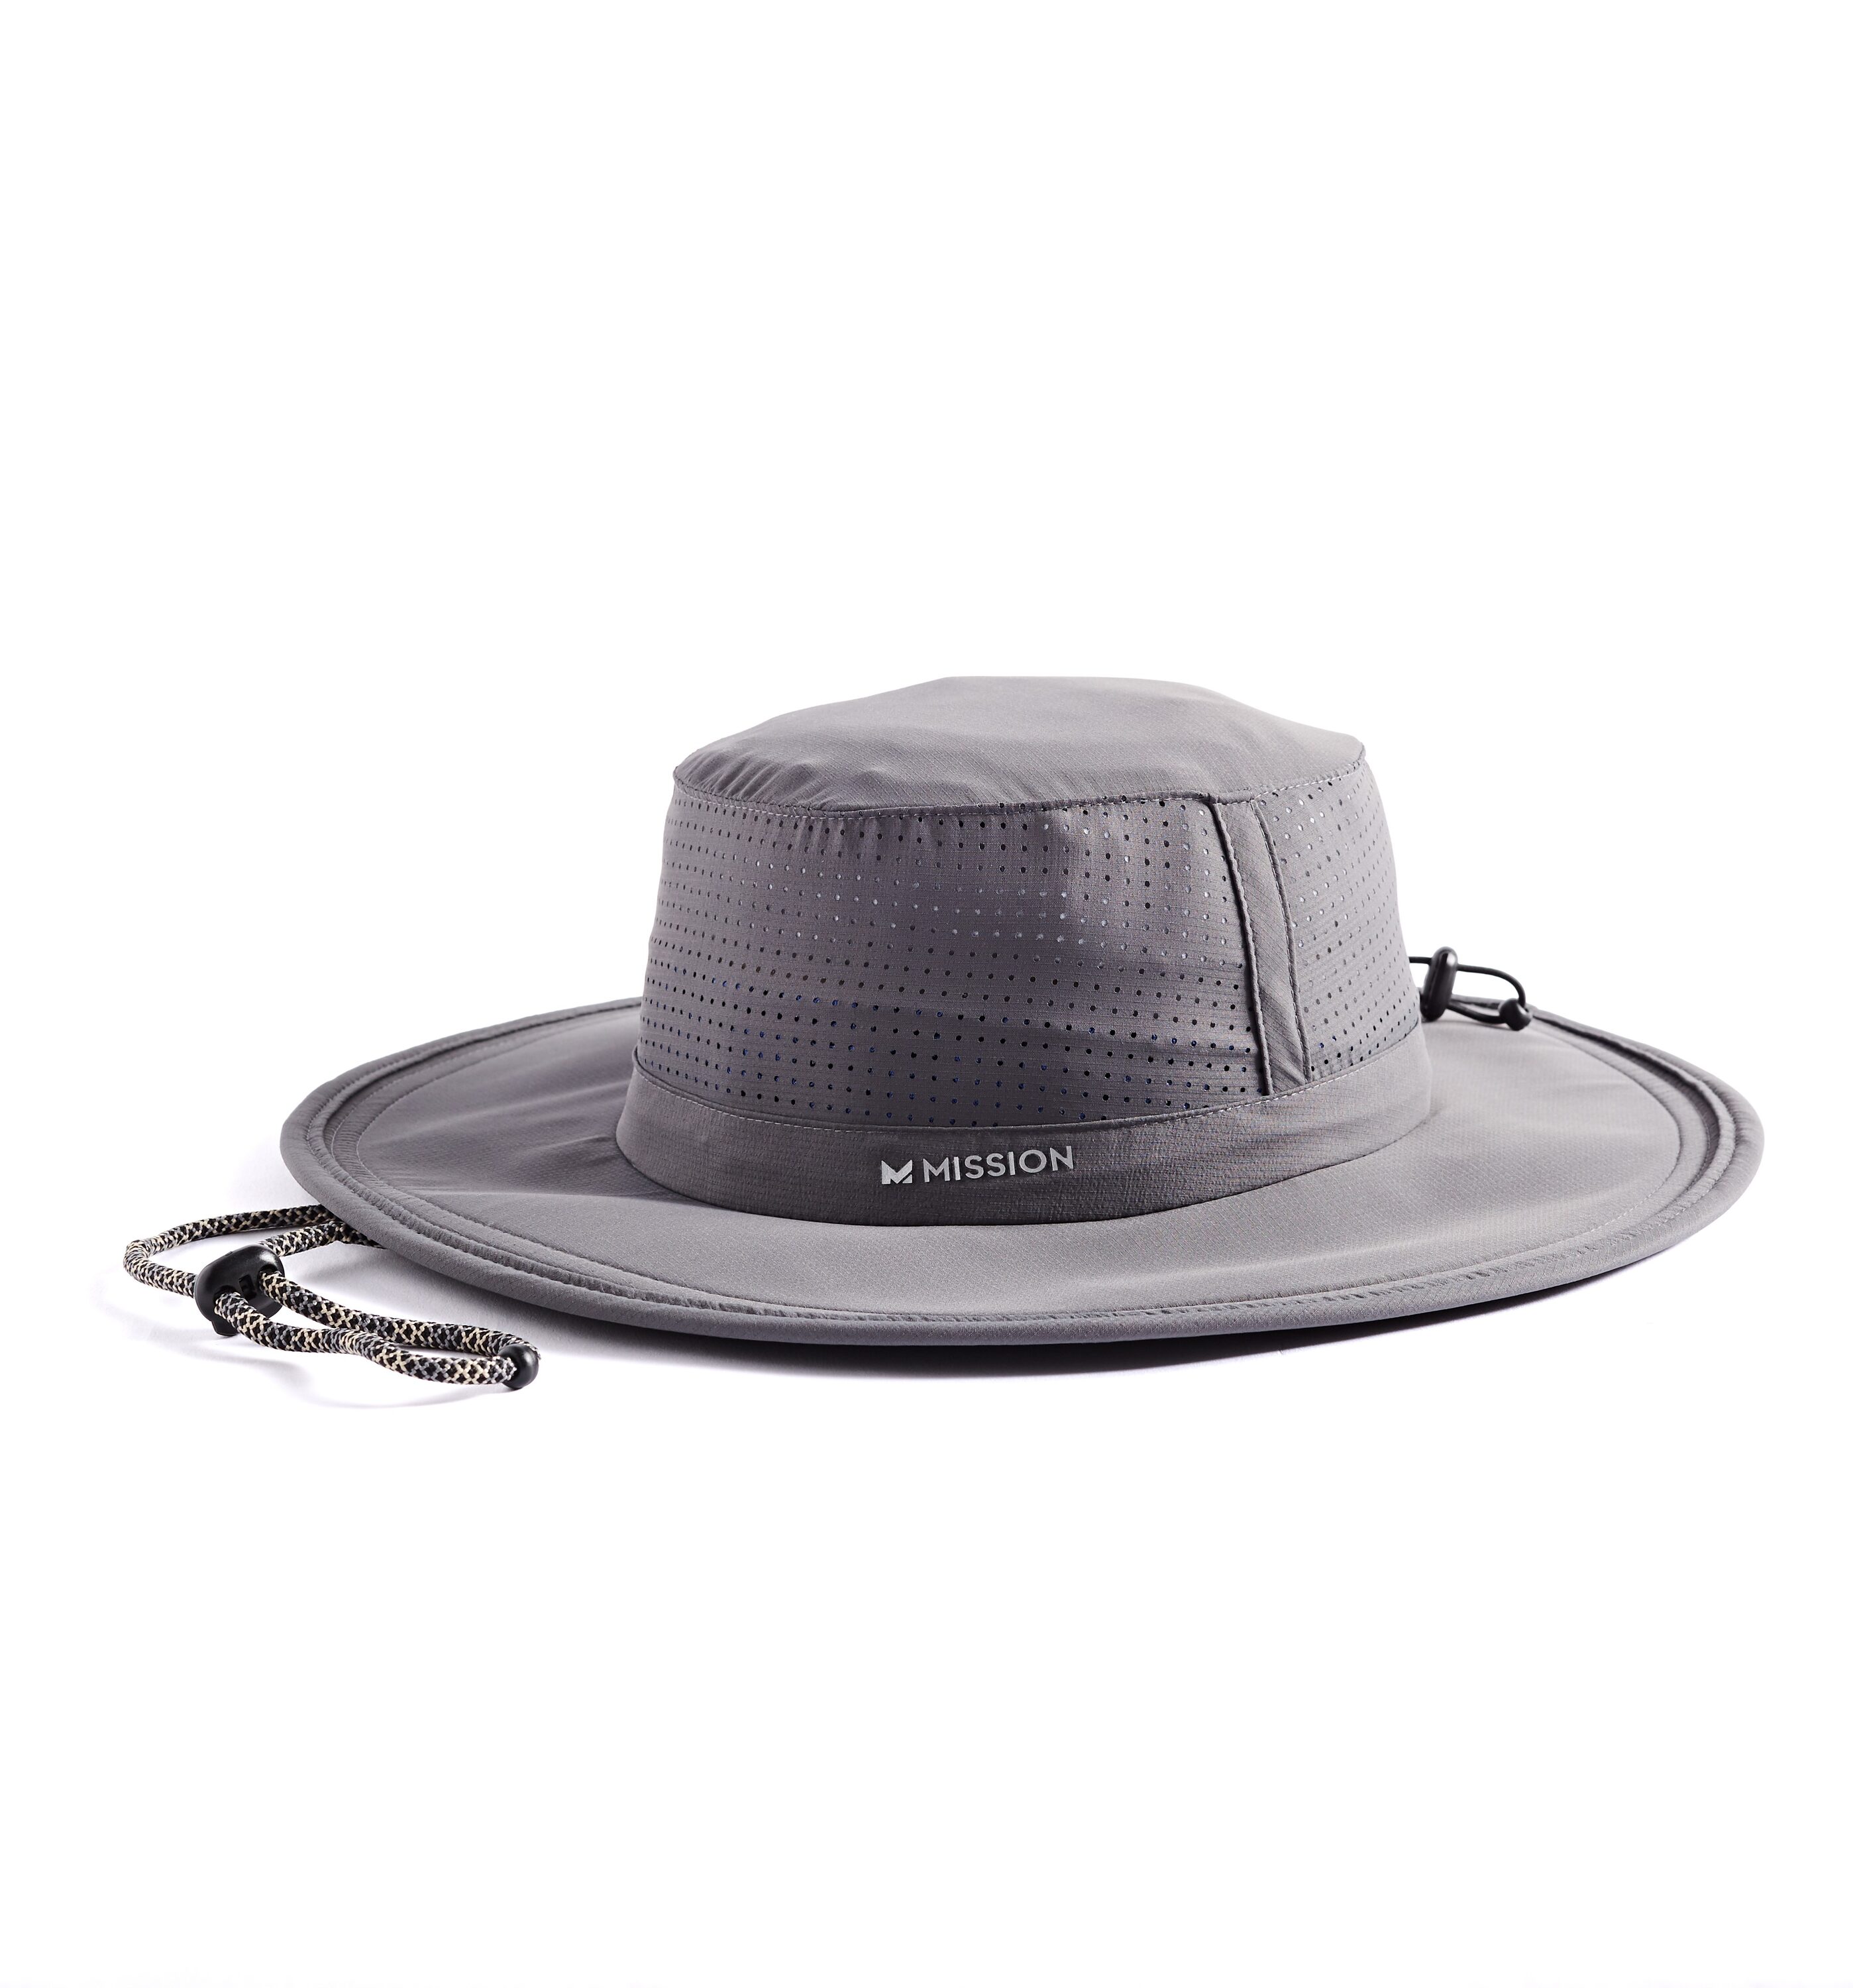 Mission Adult Unisex Cooling Hat - One Size Fits Most - Active - Cooling -  UPF 50 Sun Protection in the Hats department at